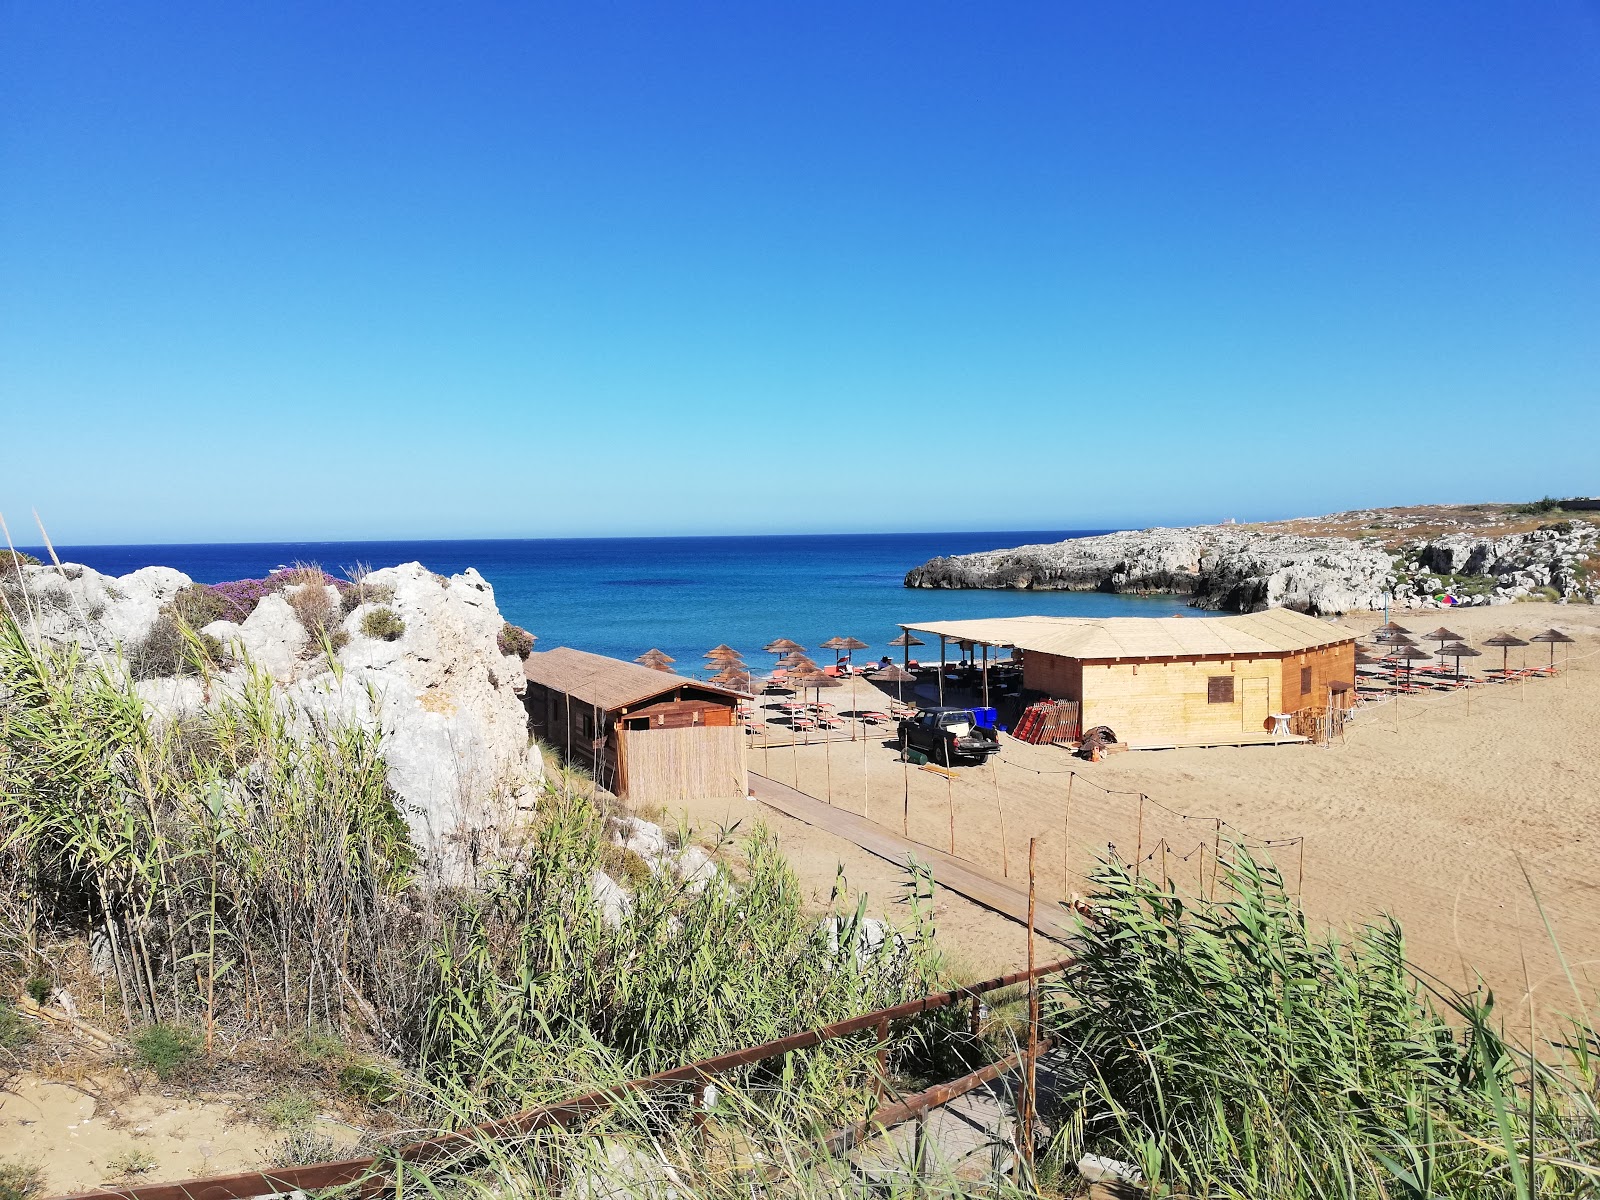 Photo of Spiaggia Cavettone with small bay